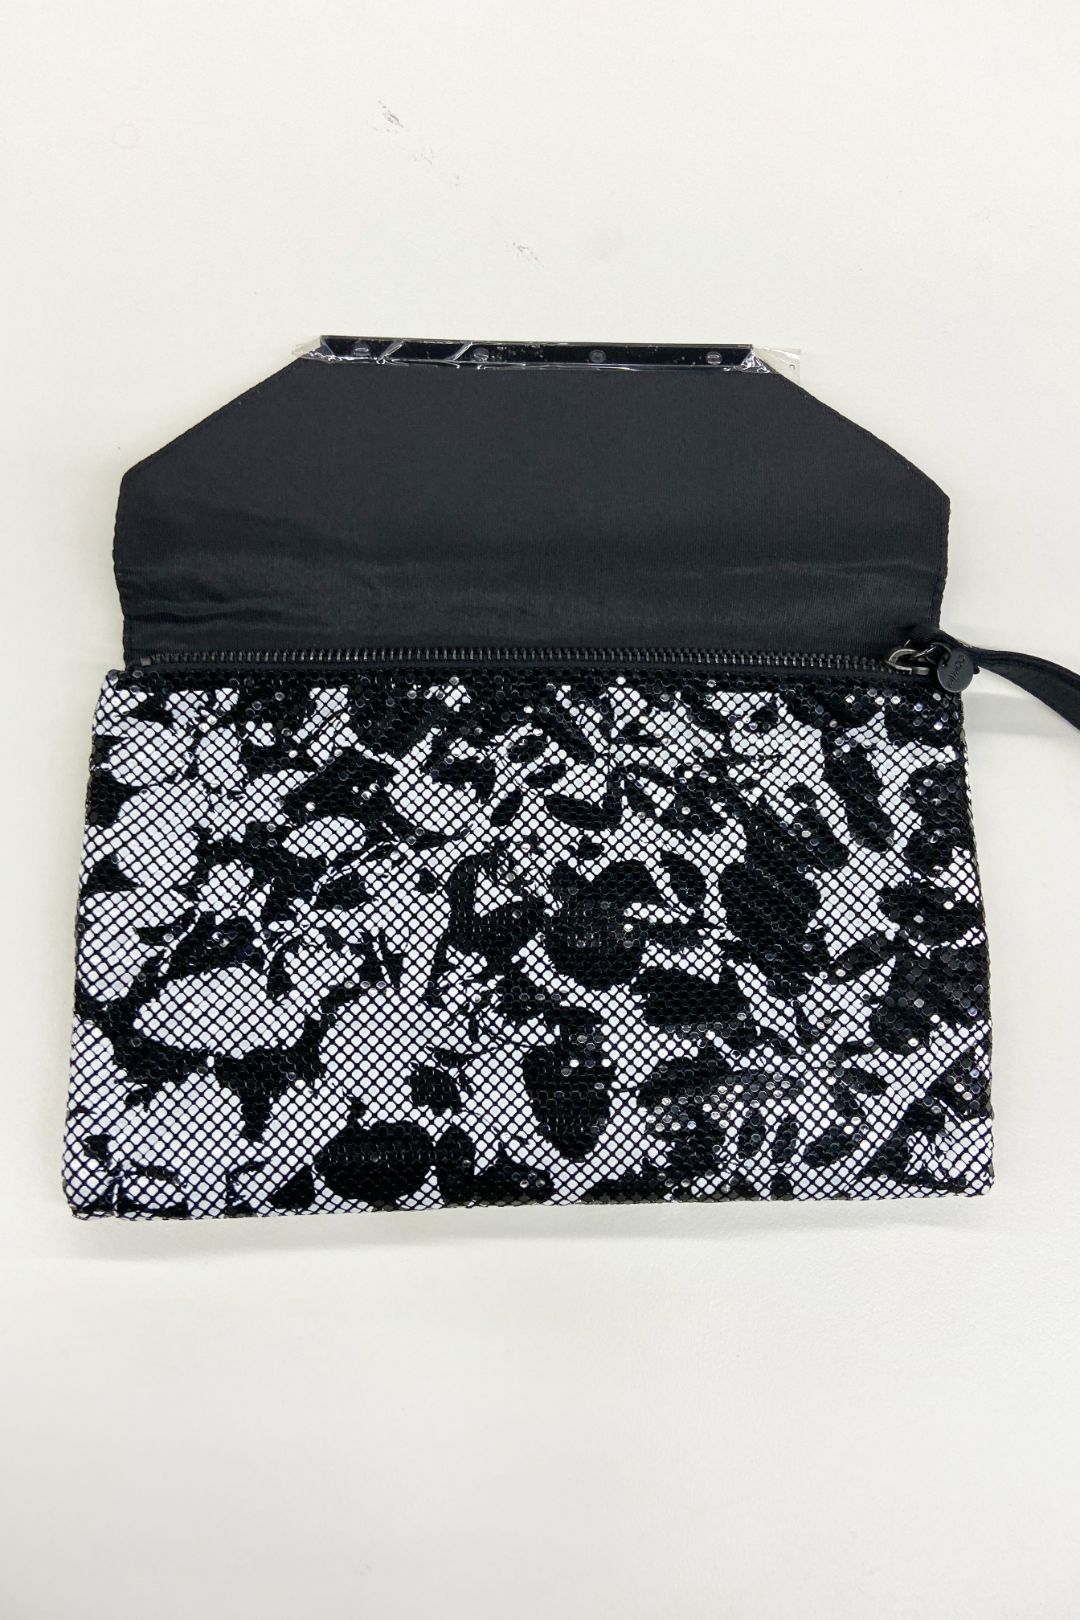 Mimco Black and White Origami Envelope Clutch